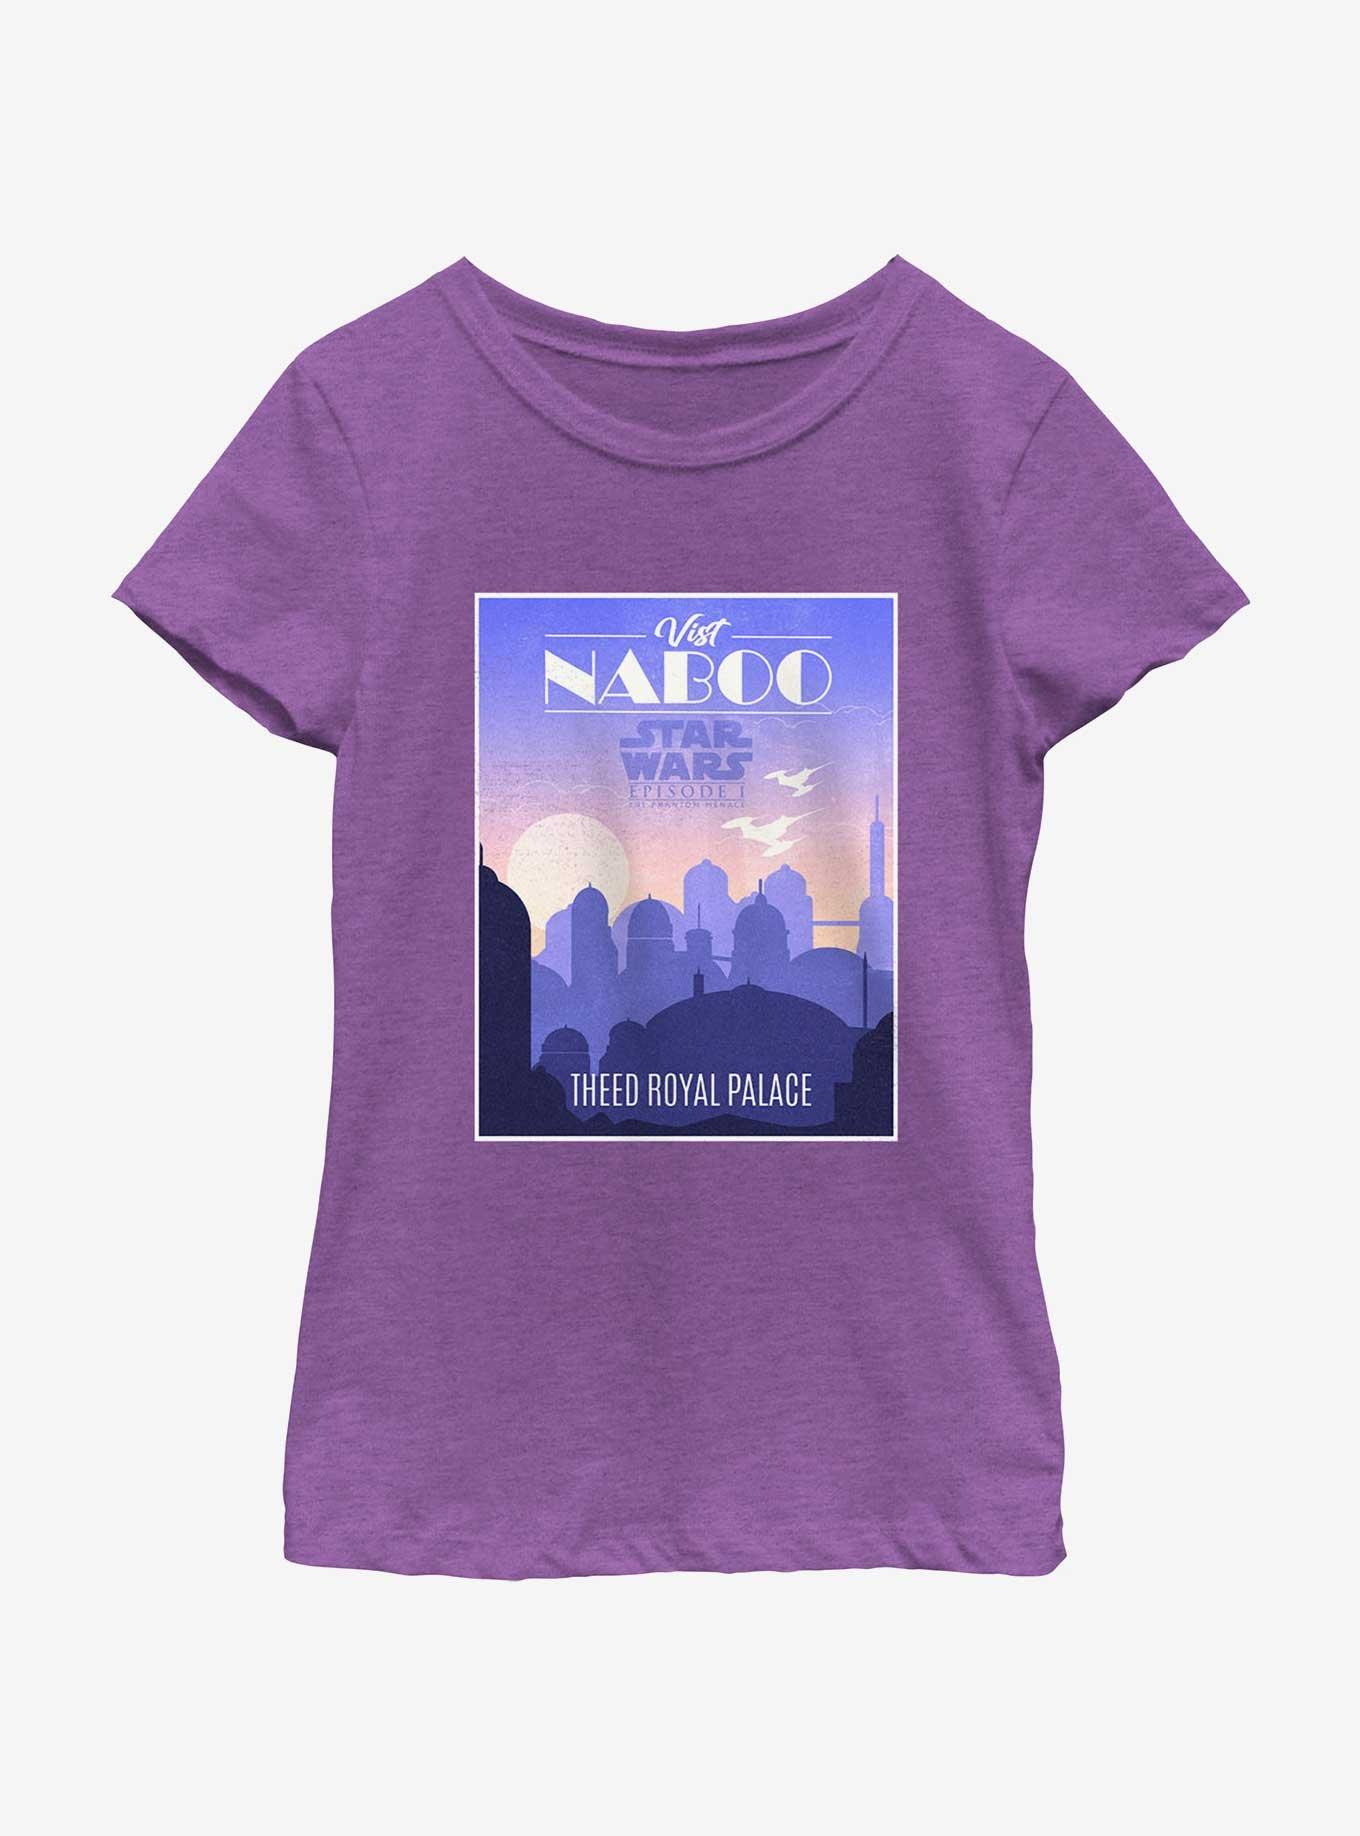 Star Wars Travel To Naboo Youth Girls T-Shirt, PURPLE BERRY, hi-res